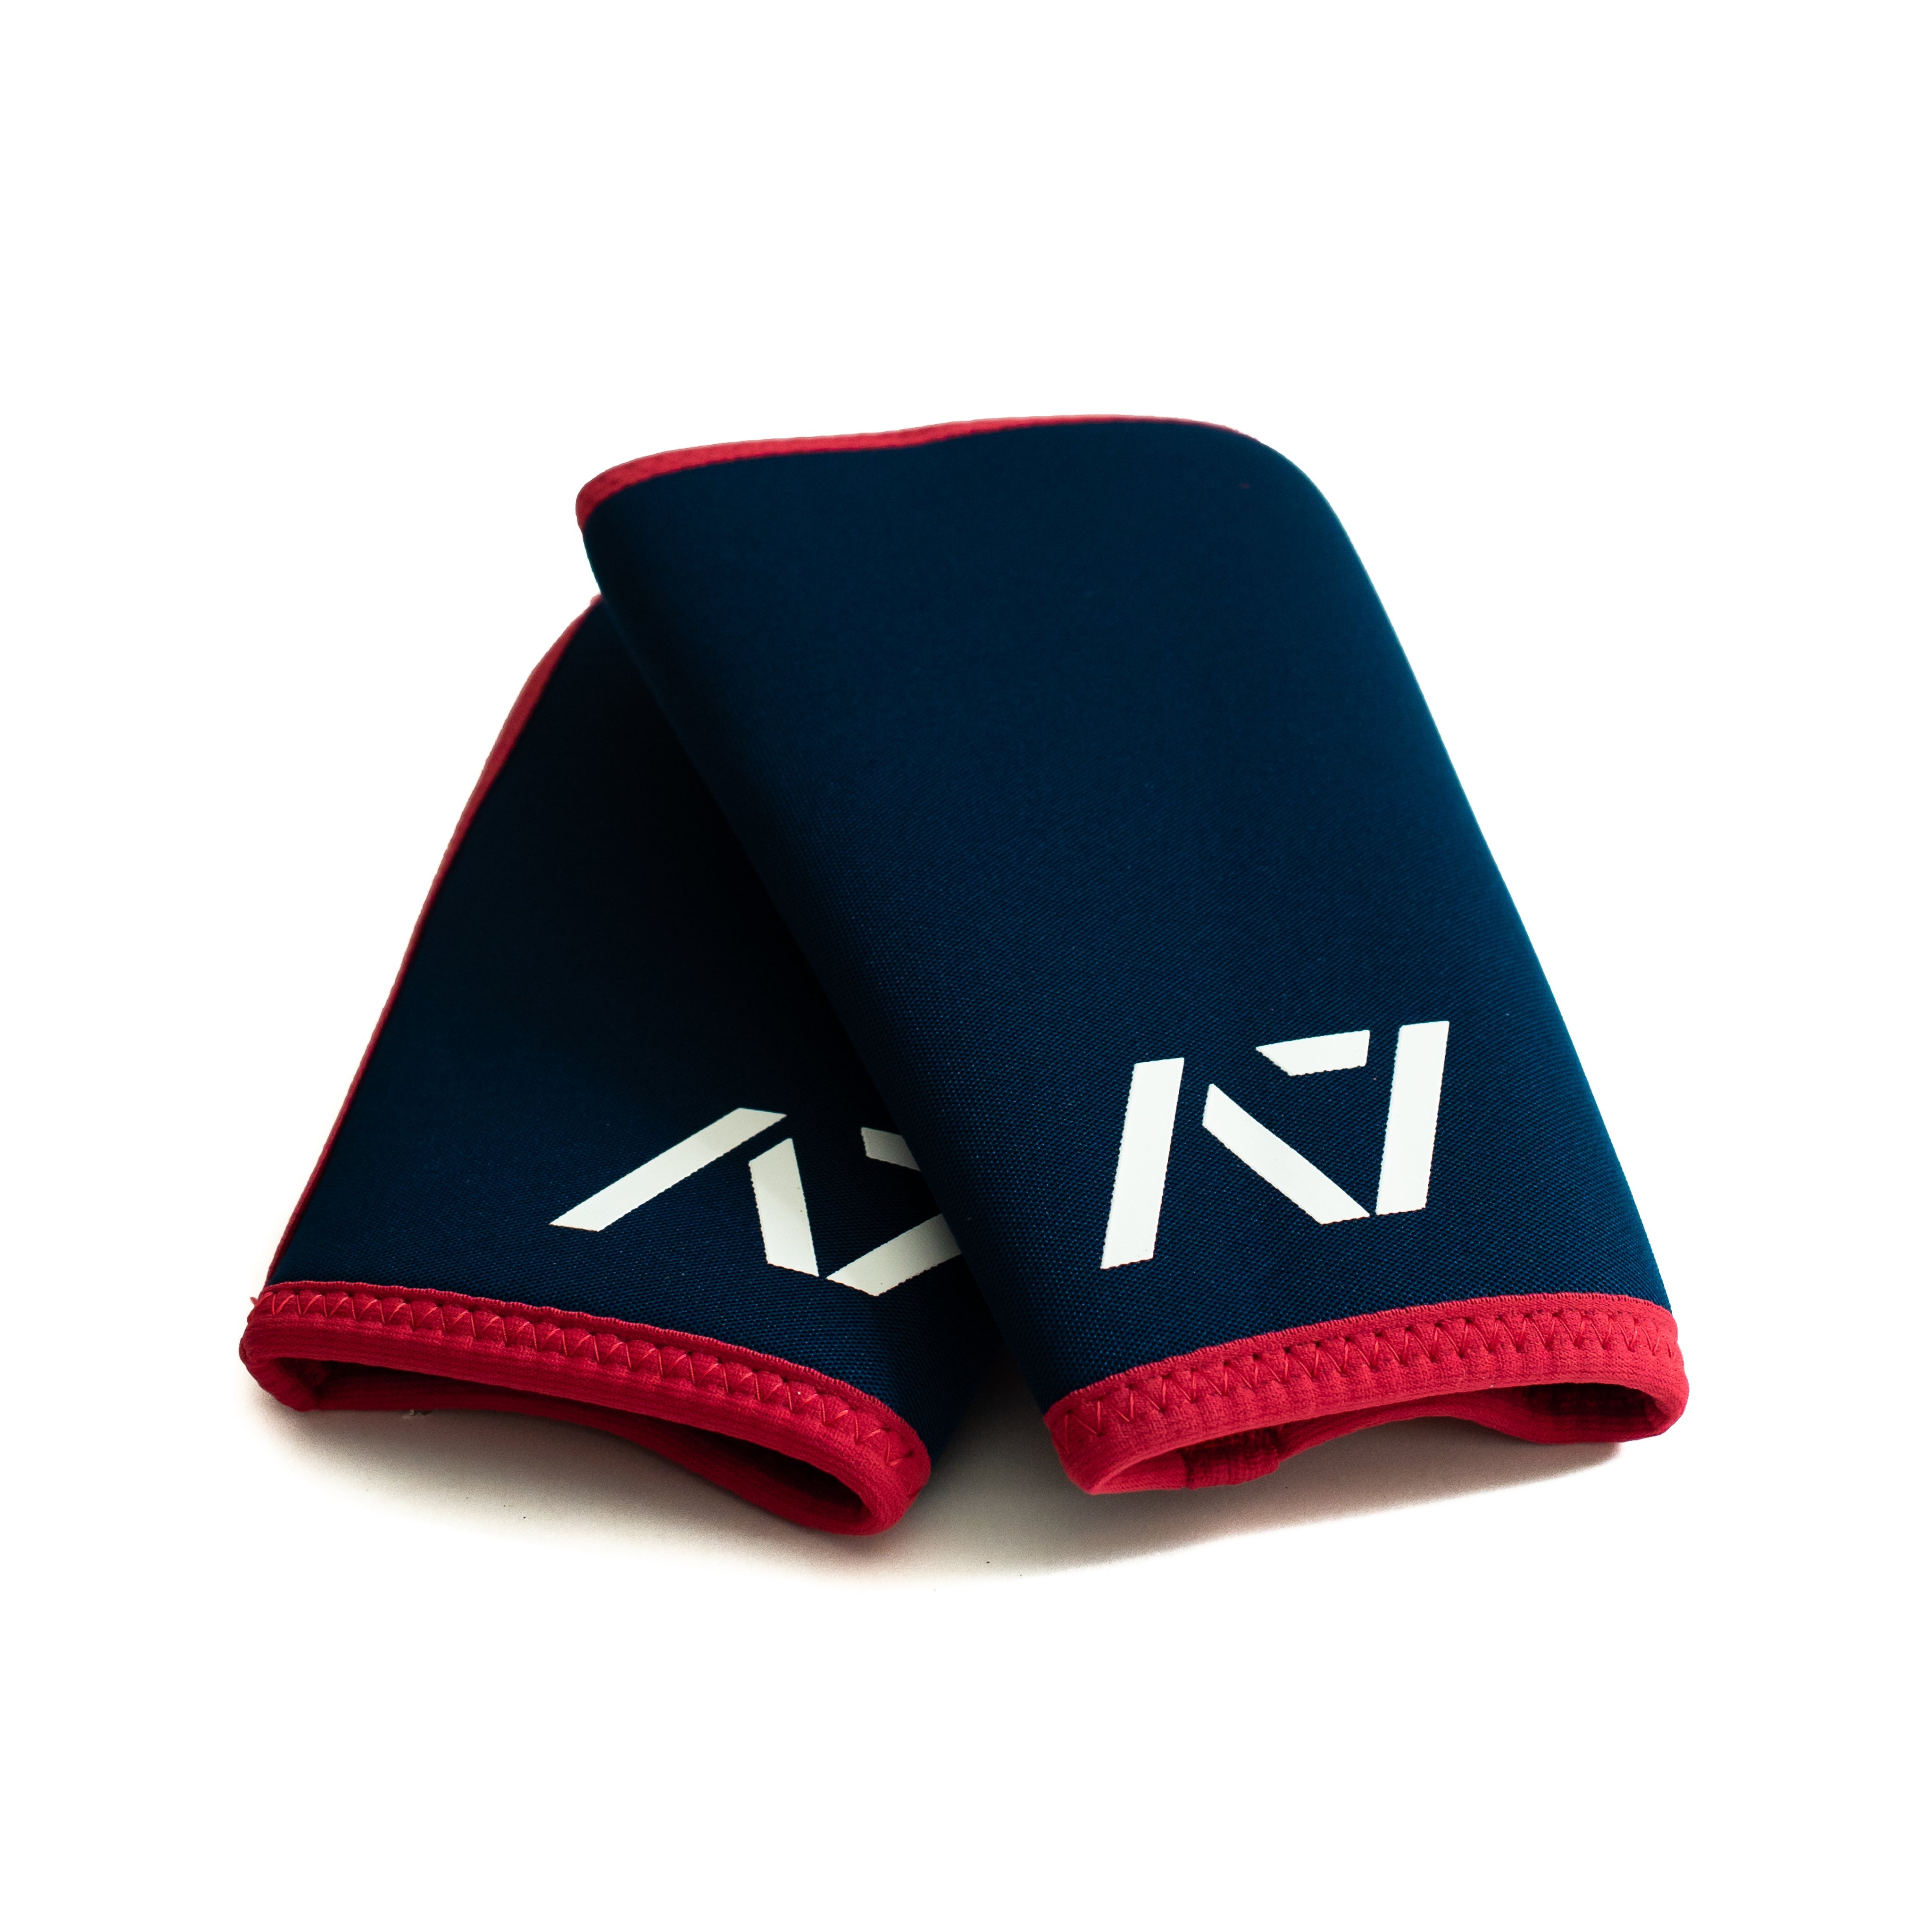 The IPF Approved A7 RWB Stiff knee sleeves are structured with a downward cut panel on the back of the quad and calf to ensure these have the ultimate compression at the knee joint. The A7 CONE RWB Stiff Knee Sleeves are IPF approved and are allowed in all IPF competitions and affiliate federations like the European Powerlifting Federation and all federations across Europe. A7 RWB Stiff Sleeves knee sleeves are IPF Approved Kit. A7 UK shipping to UK and Europe.